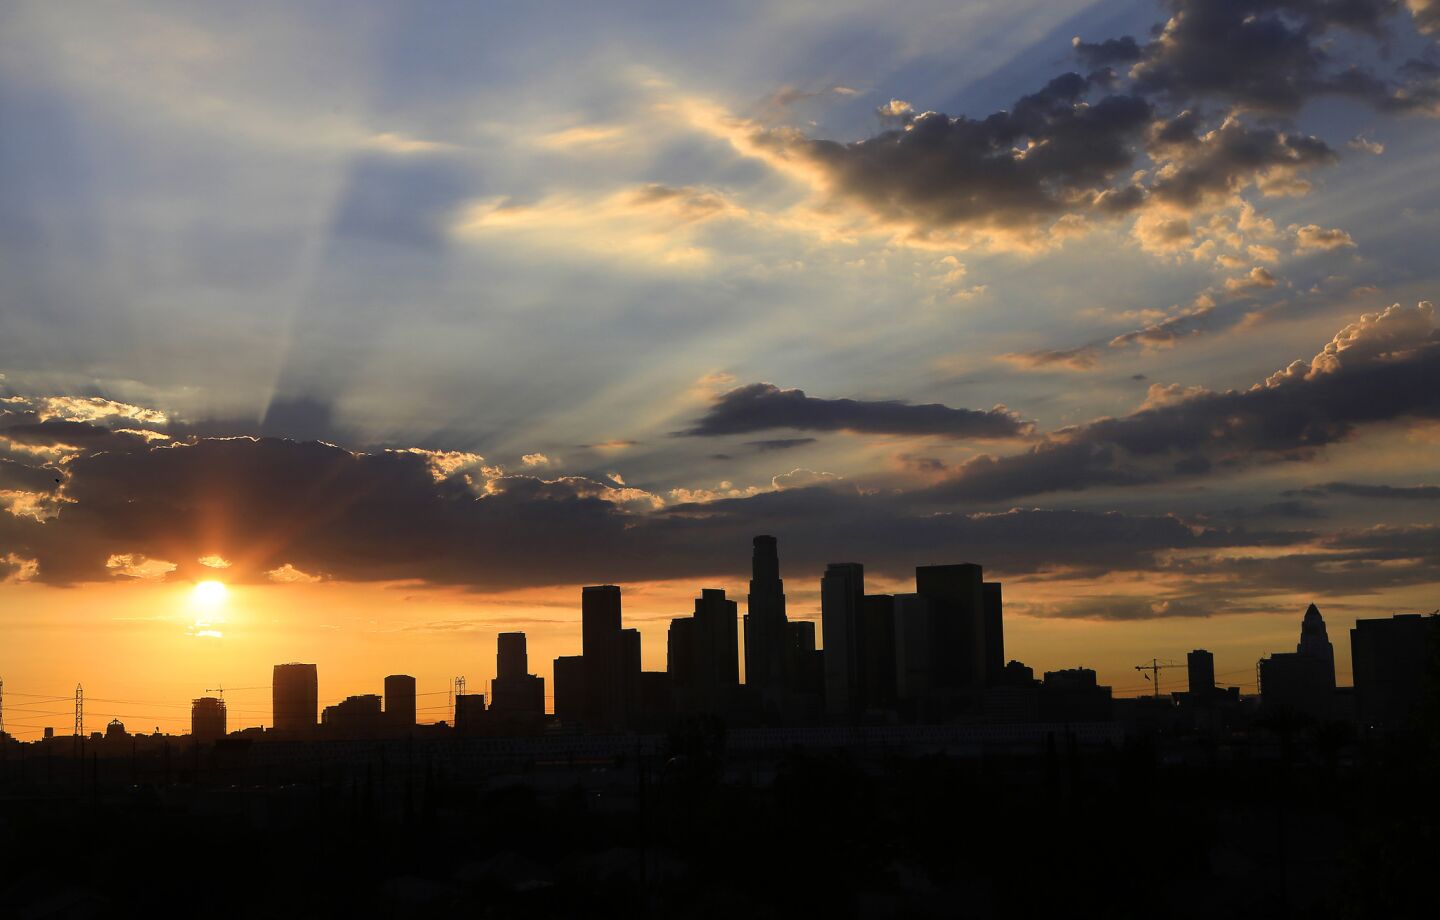 The setting suns sets clouds aglow as they pass over the Los Angeles skyline.